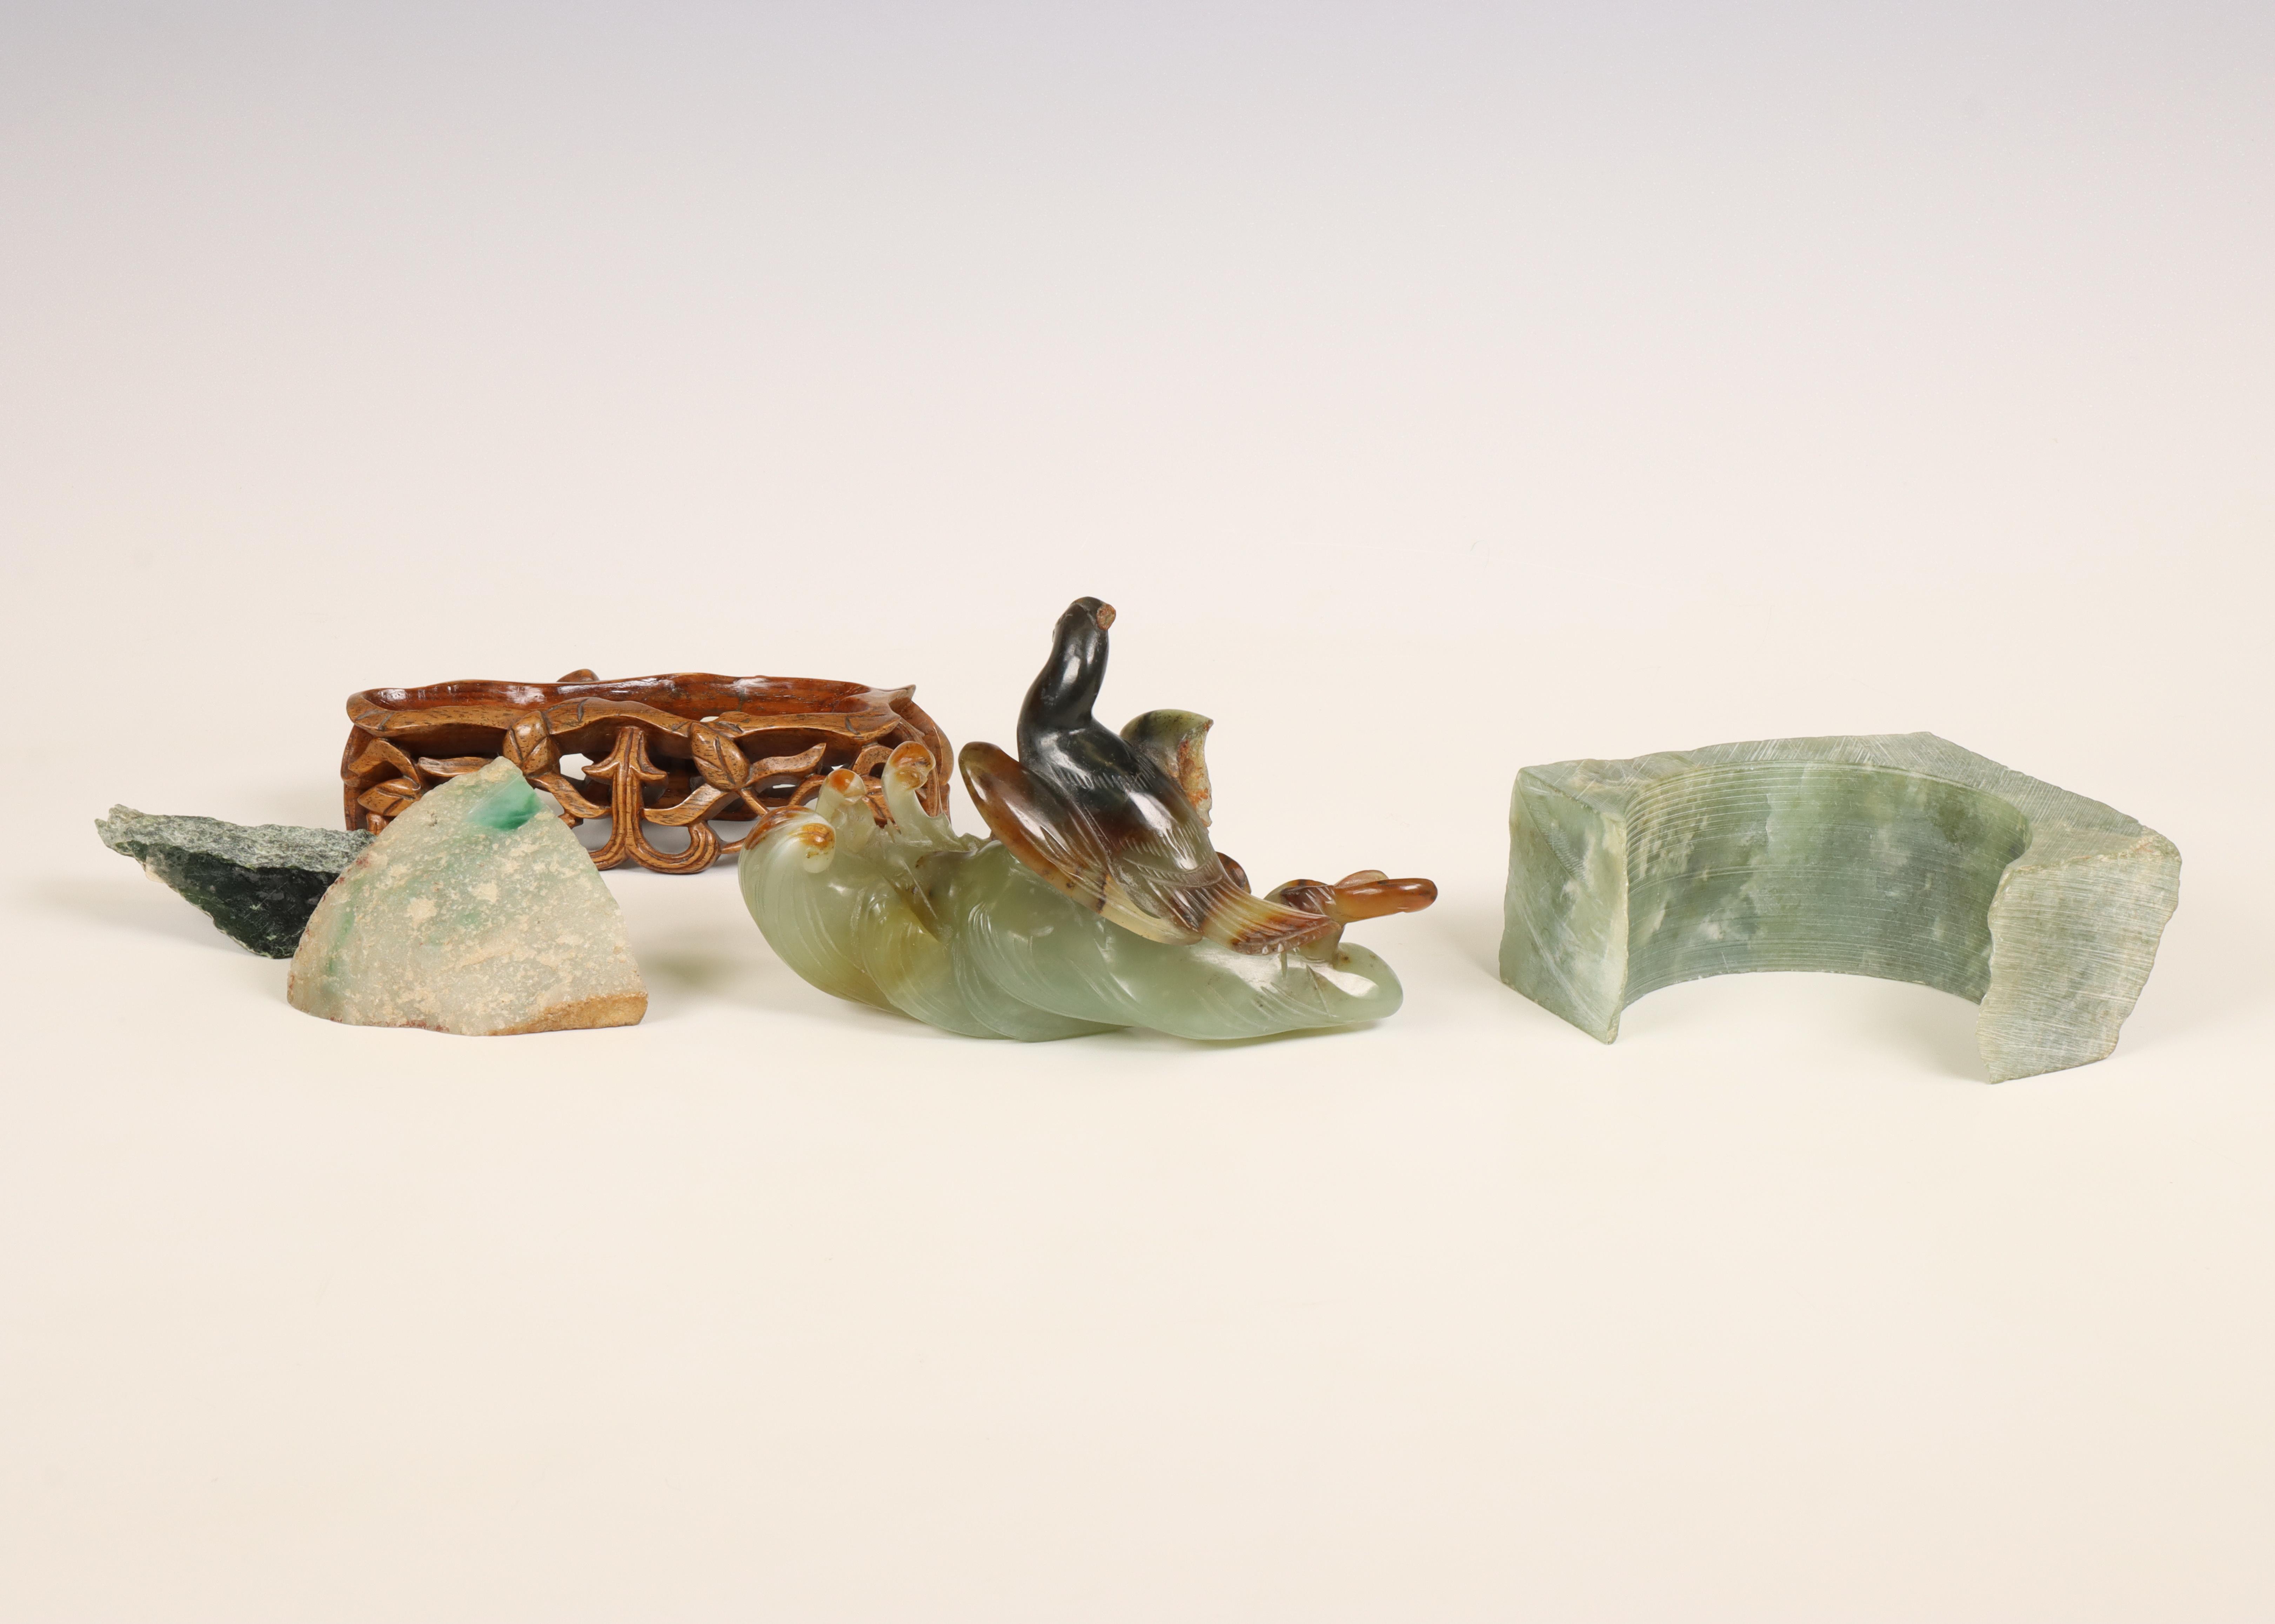 China, jade carving of a bird and three jade stones, late Qing dynasty (1644-1912), - Image 2 of 2